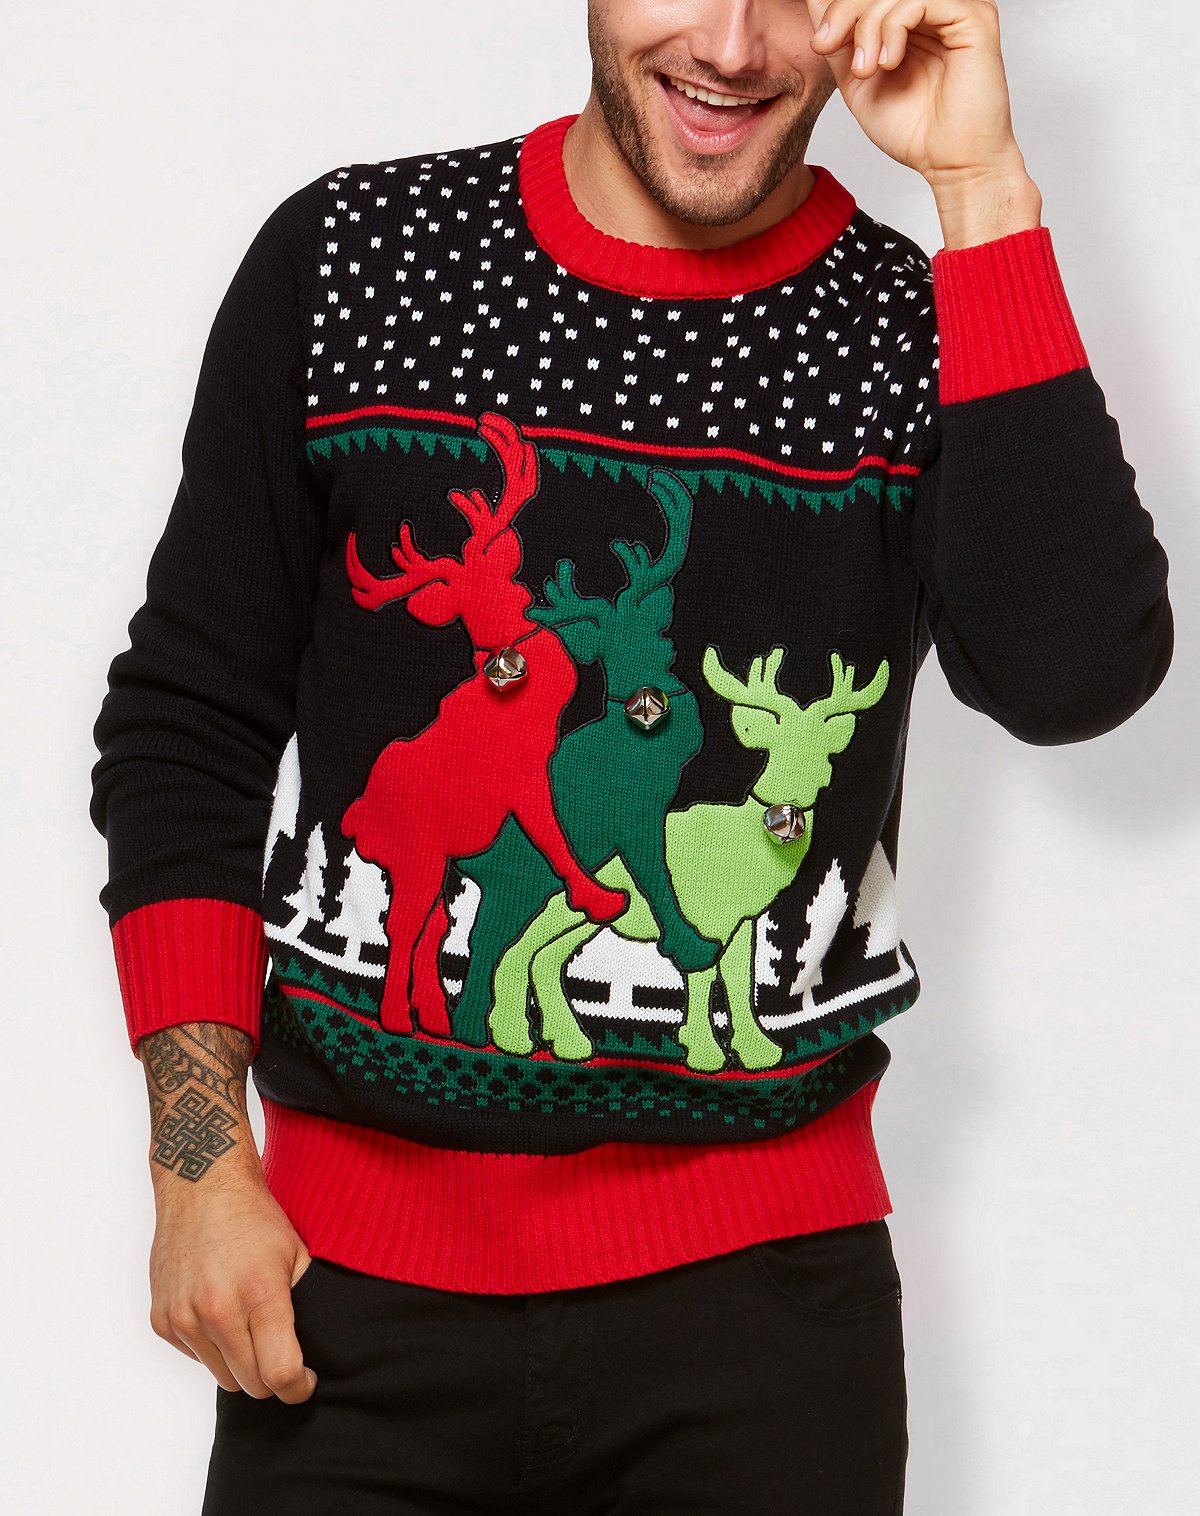 Spencer's Threesome Reindeer Ugly Christmas Sweater